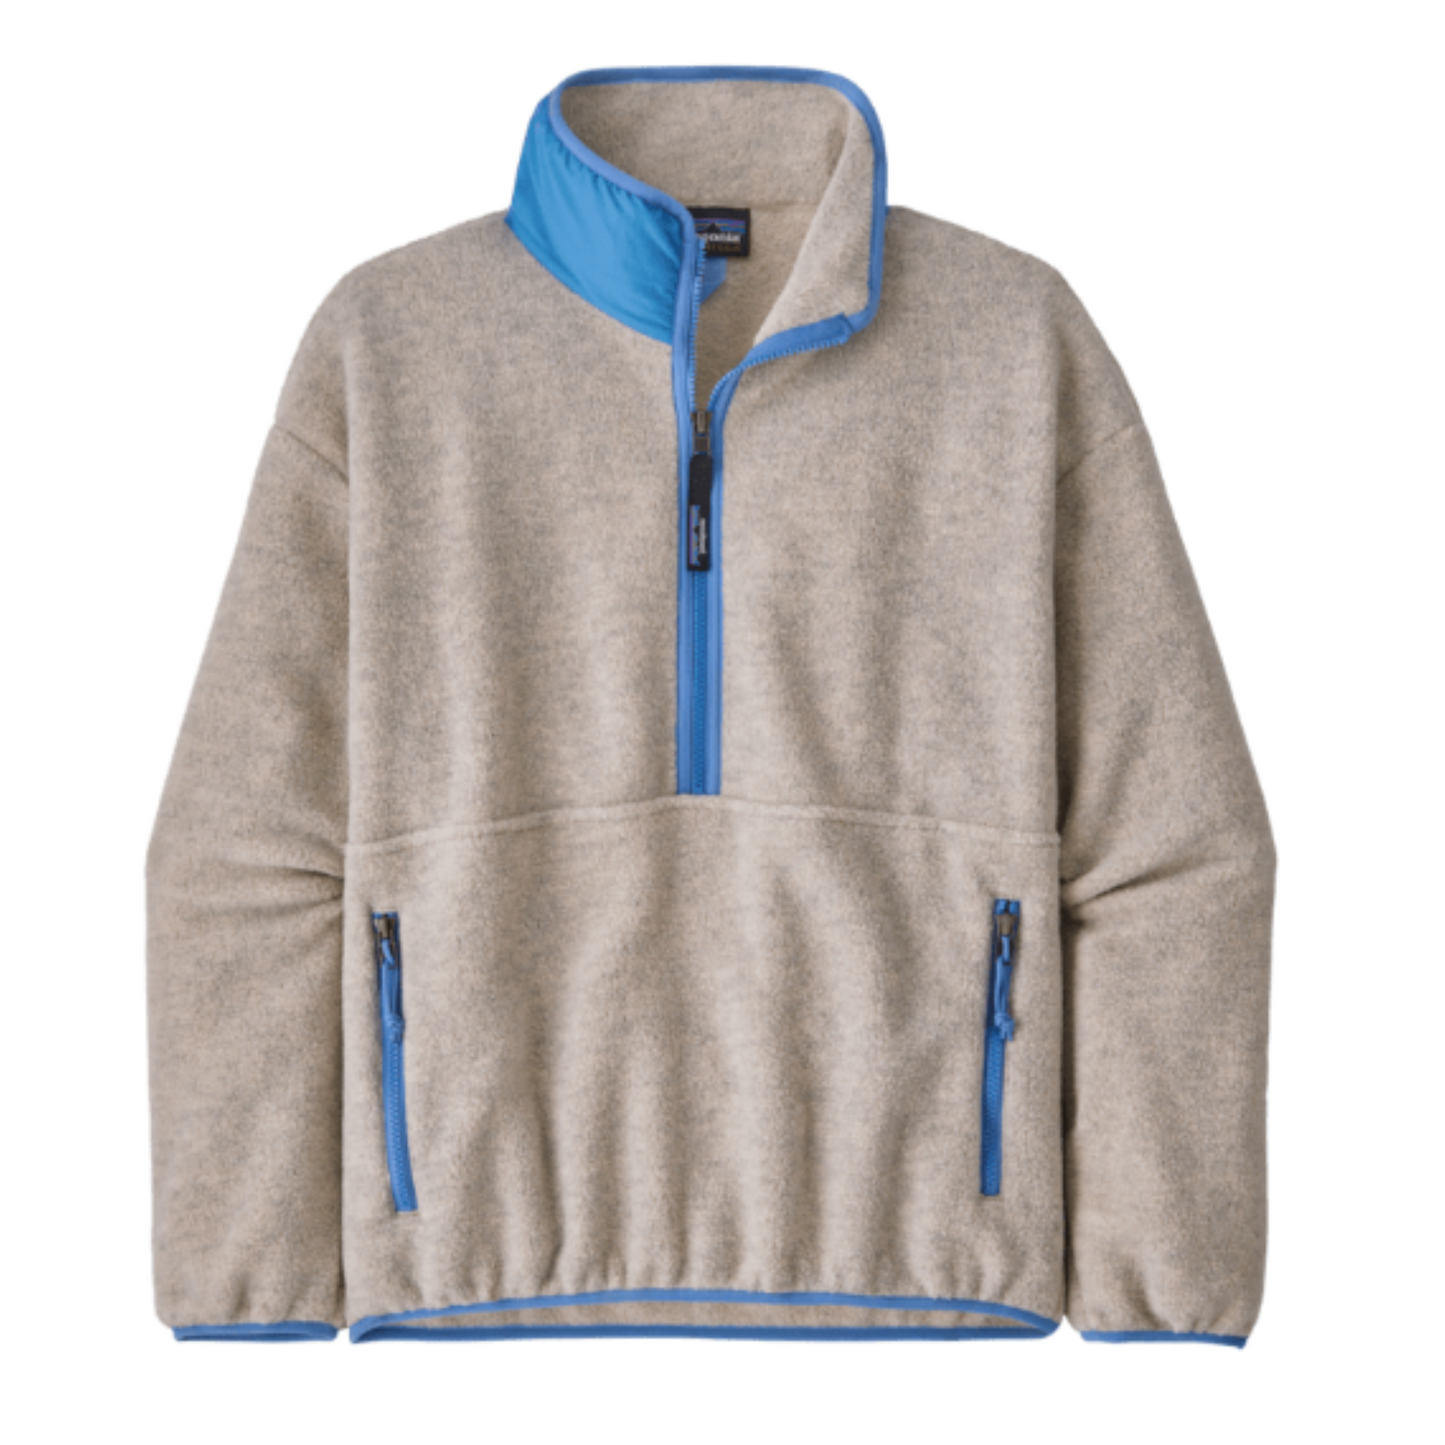 Patagonia Women's Synchilla Marsupial in oatmeal and Blue